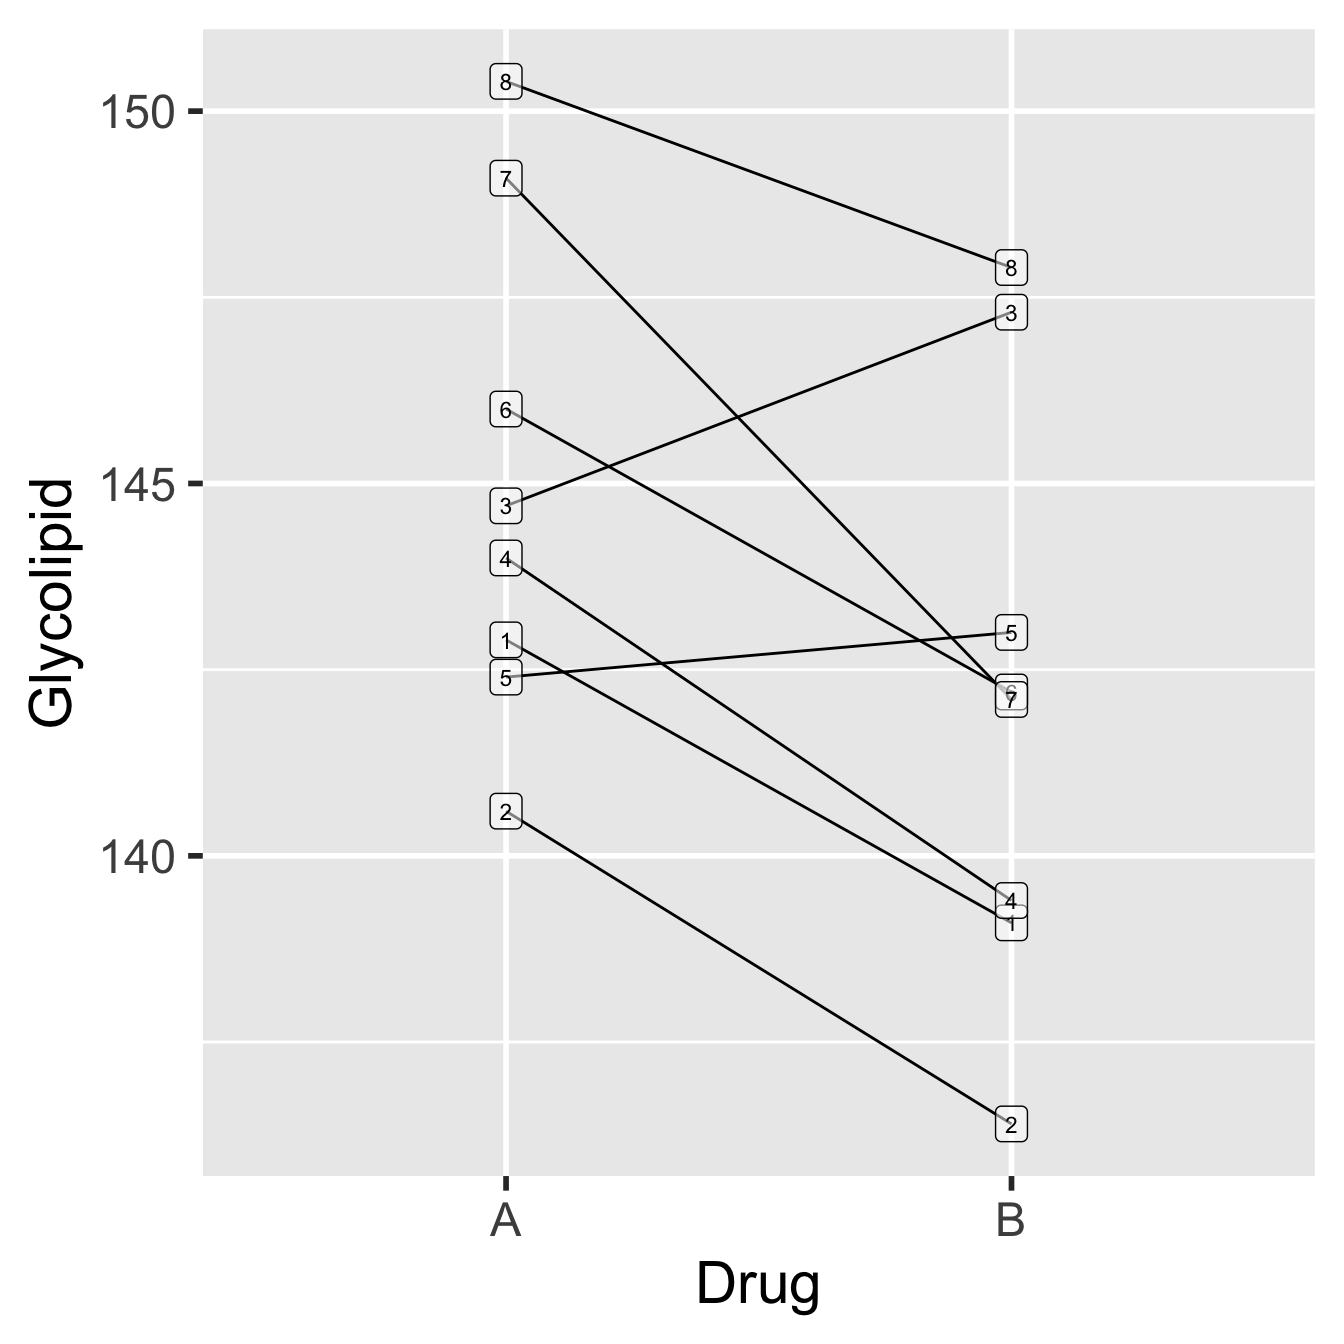 Data from glycolipid study, showing paired design. Each patient is denoted by a unique number.